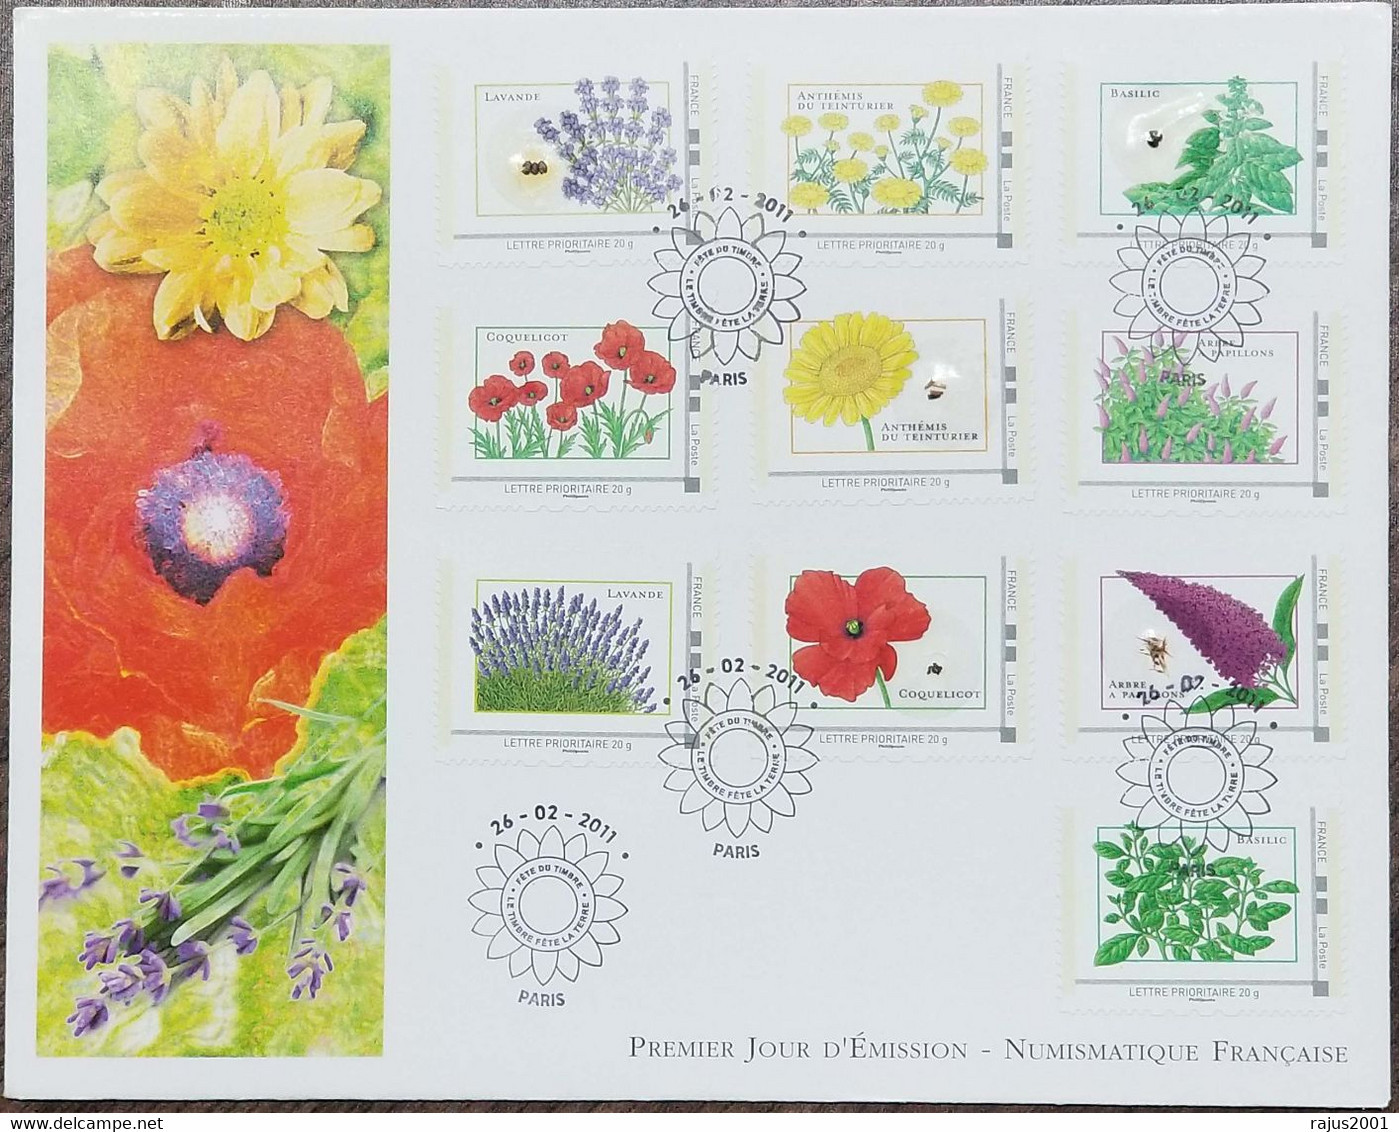 Seeds Of France, Seeds Of Lavander, Anthemis, DIFFERENT REAL FLOWER SEEDS AFFIXED ON Stamp UNUSUAL FDC 2011 - Fehldrucke